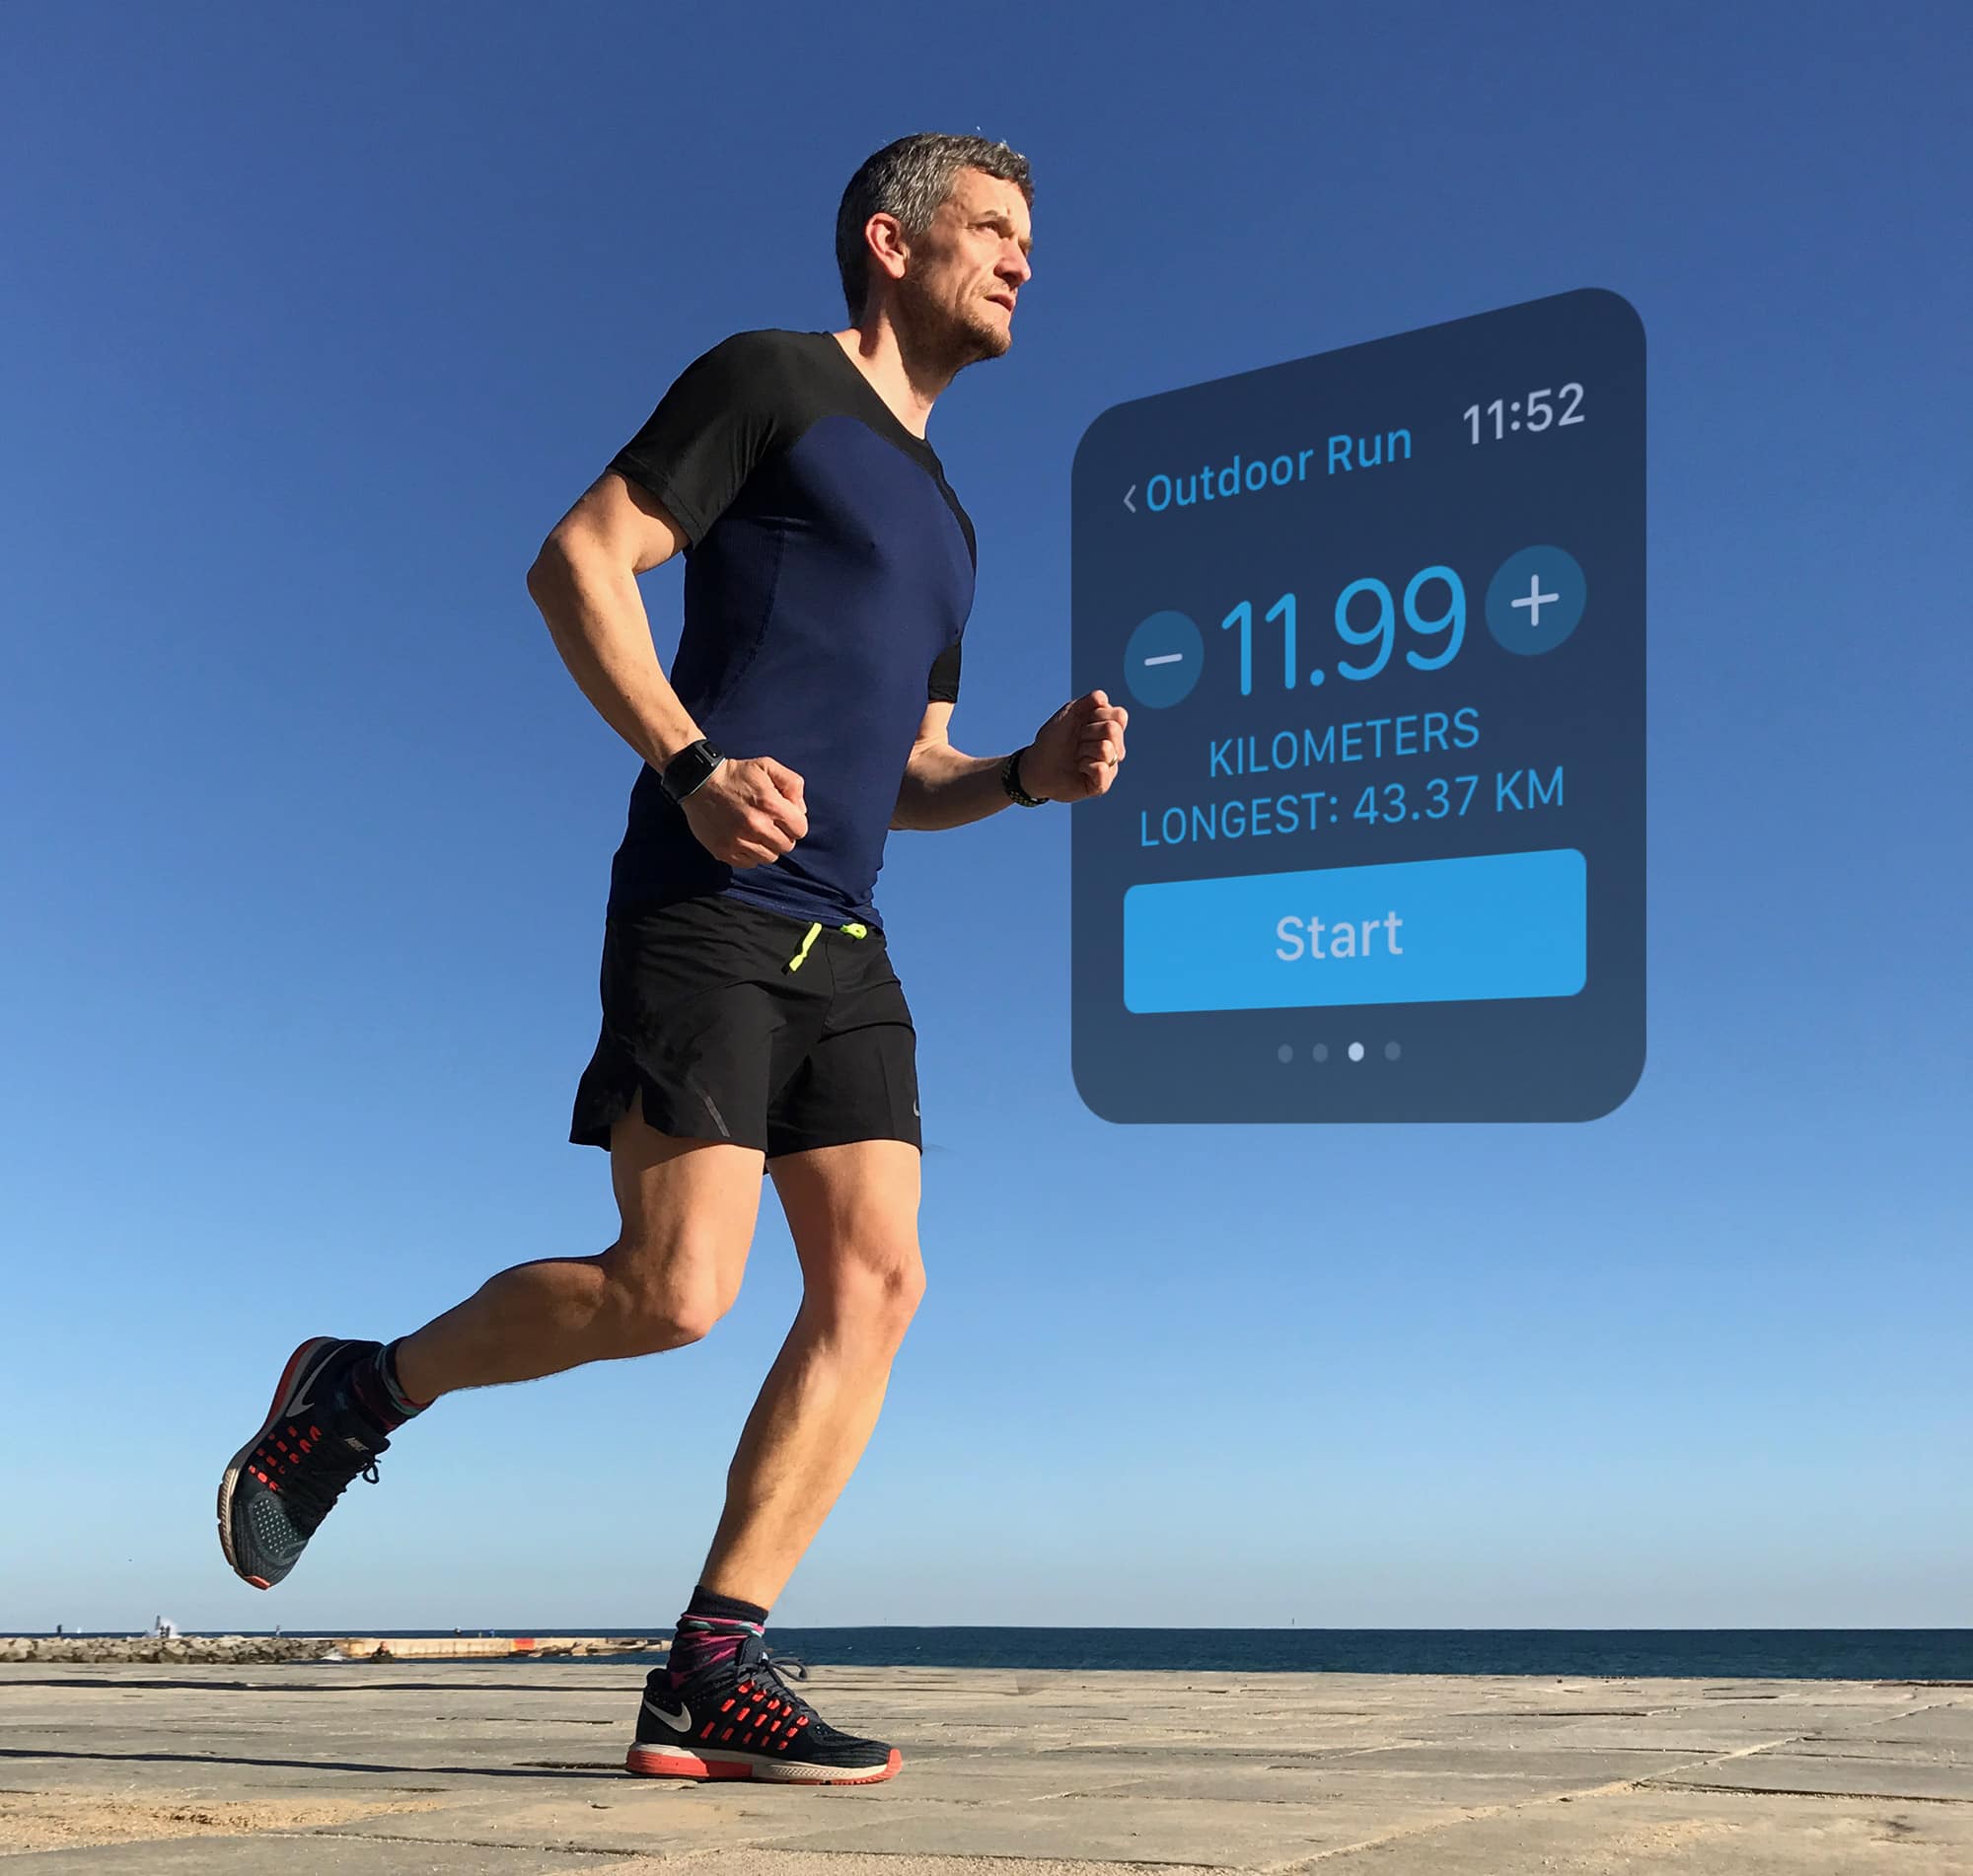 Choosing an Apple Watch running app? Let us do the legwork for you